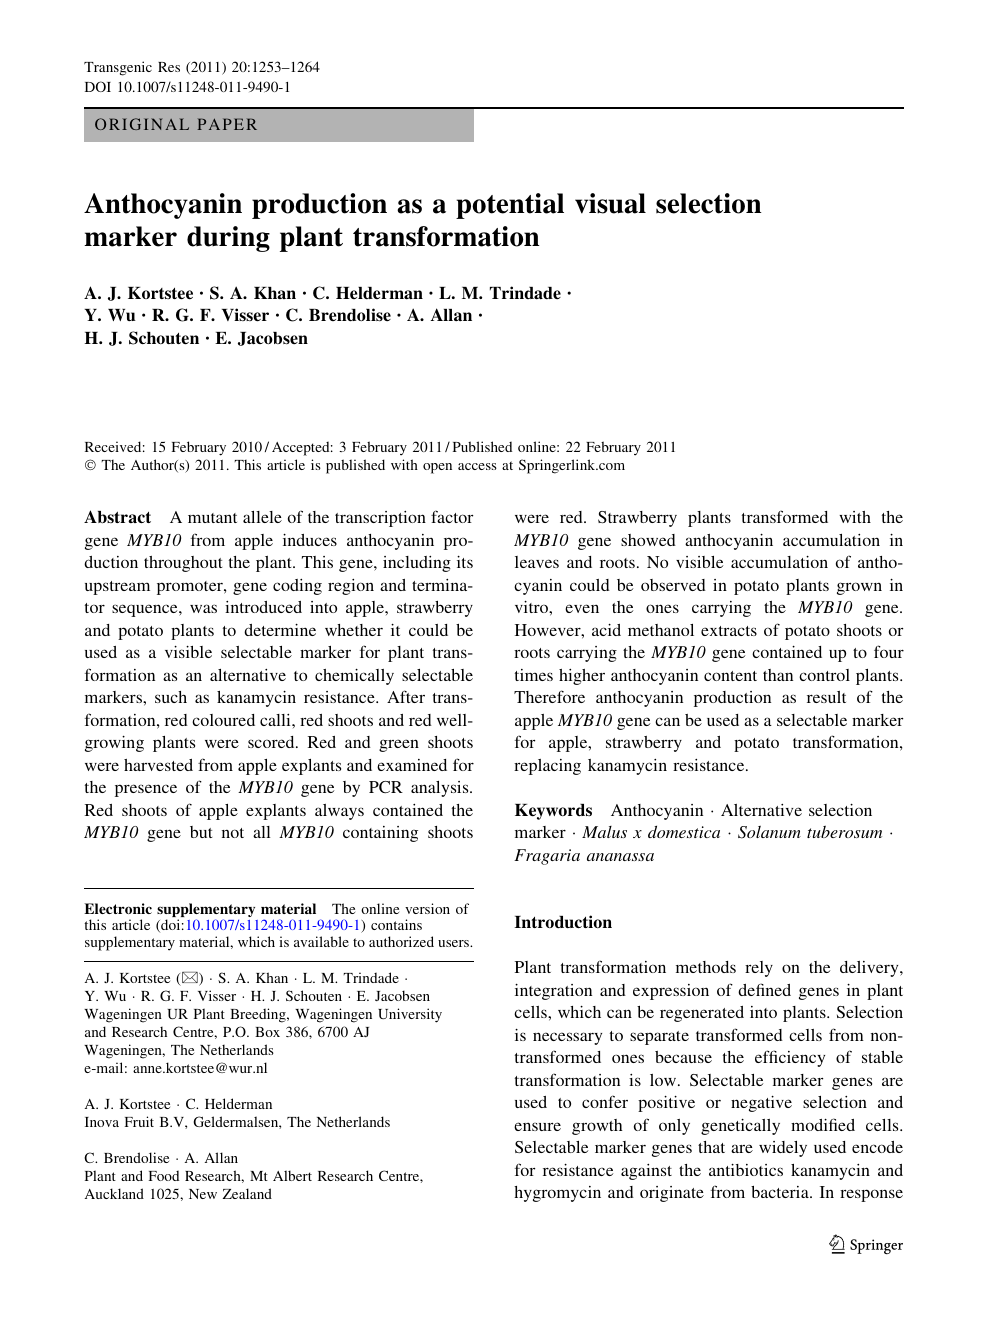 Anthocyanin Production As A Potential Visual Selection Marker During Plant Transformation Topic Of Research Paper In Biological Sciences Download Scholarly Article Pdf And Read For Free On Cyberleninka Open Science Hub